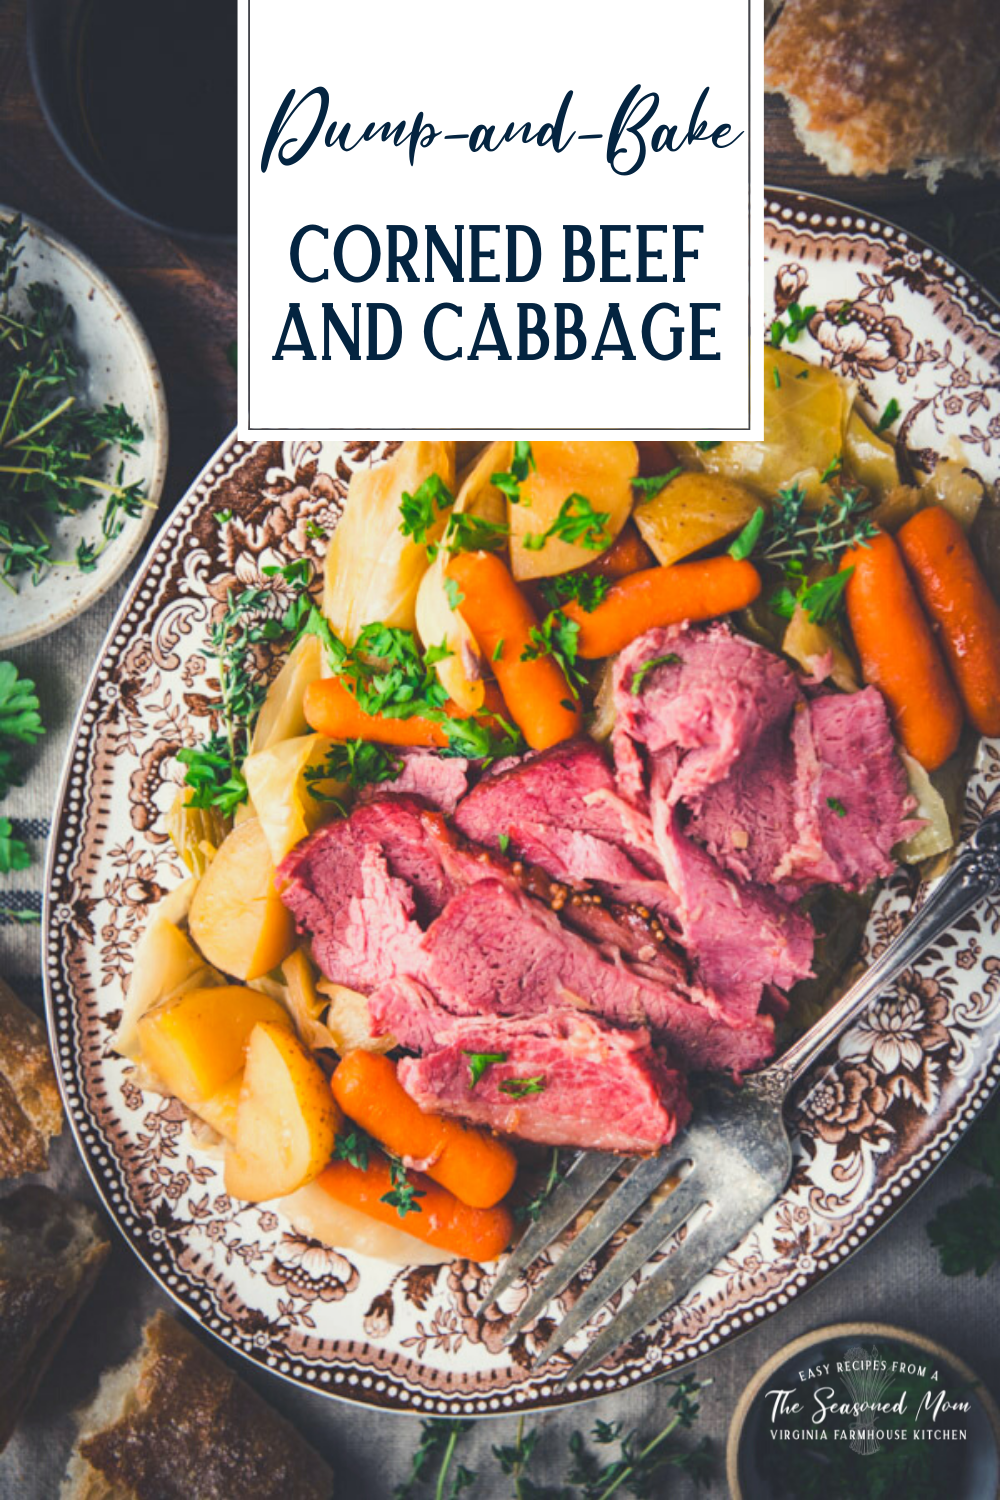 Overhead image of a tray of corned beef and cabbage with potatoes and carrots and text title overlay